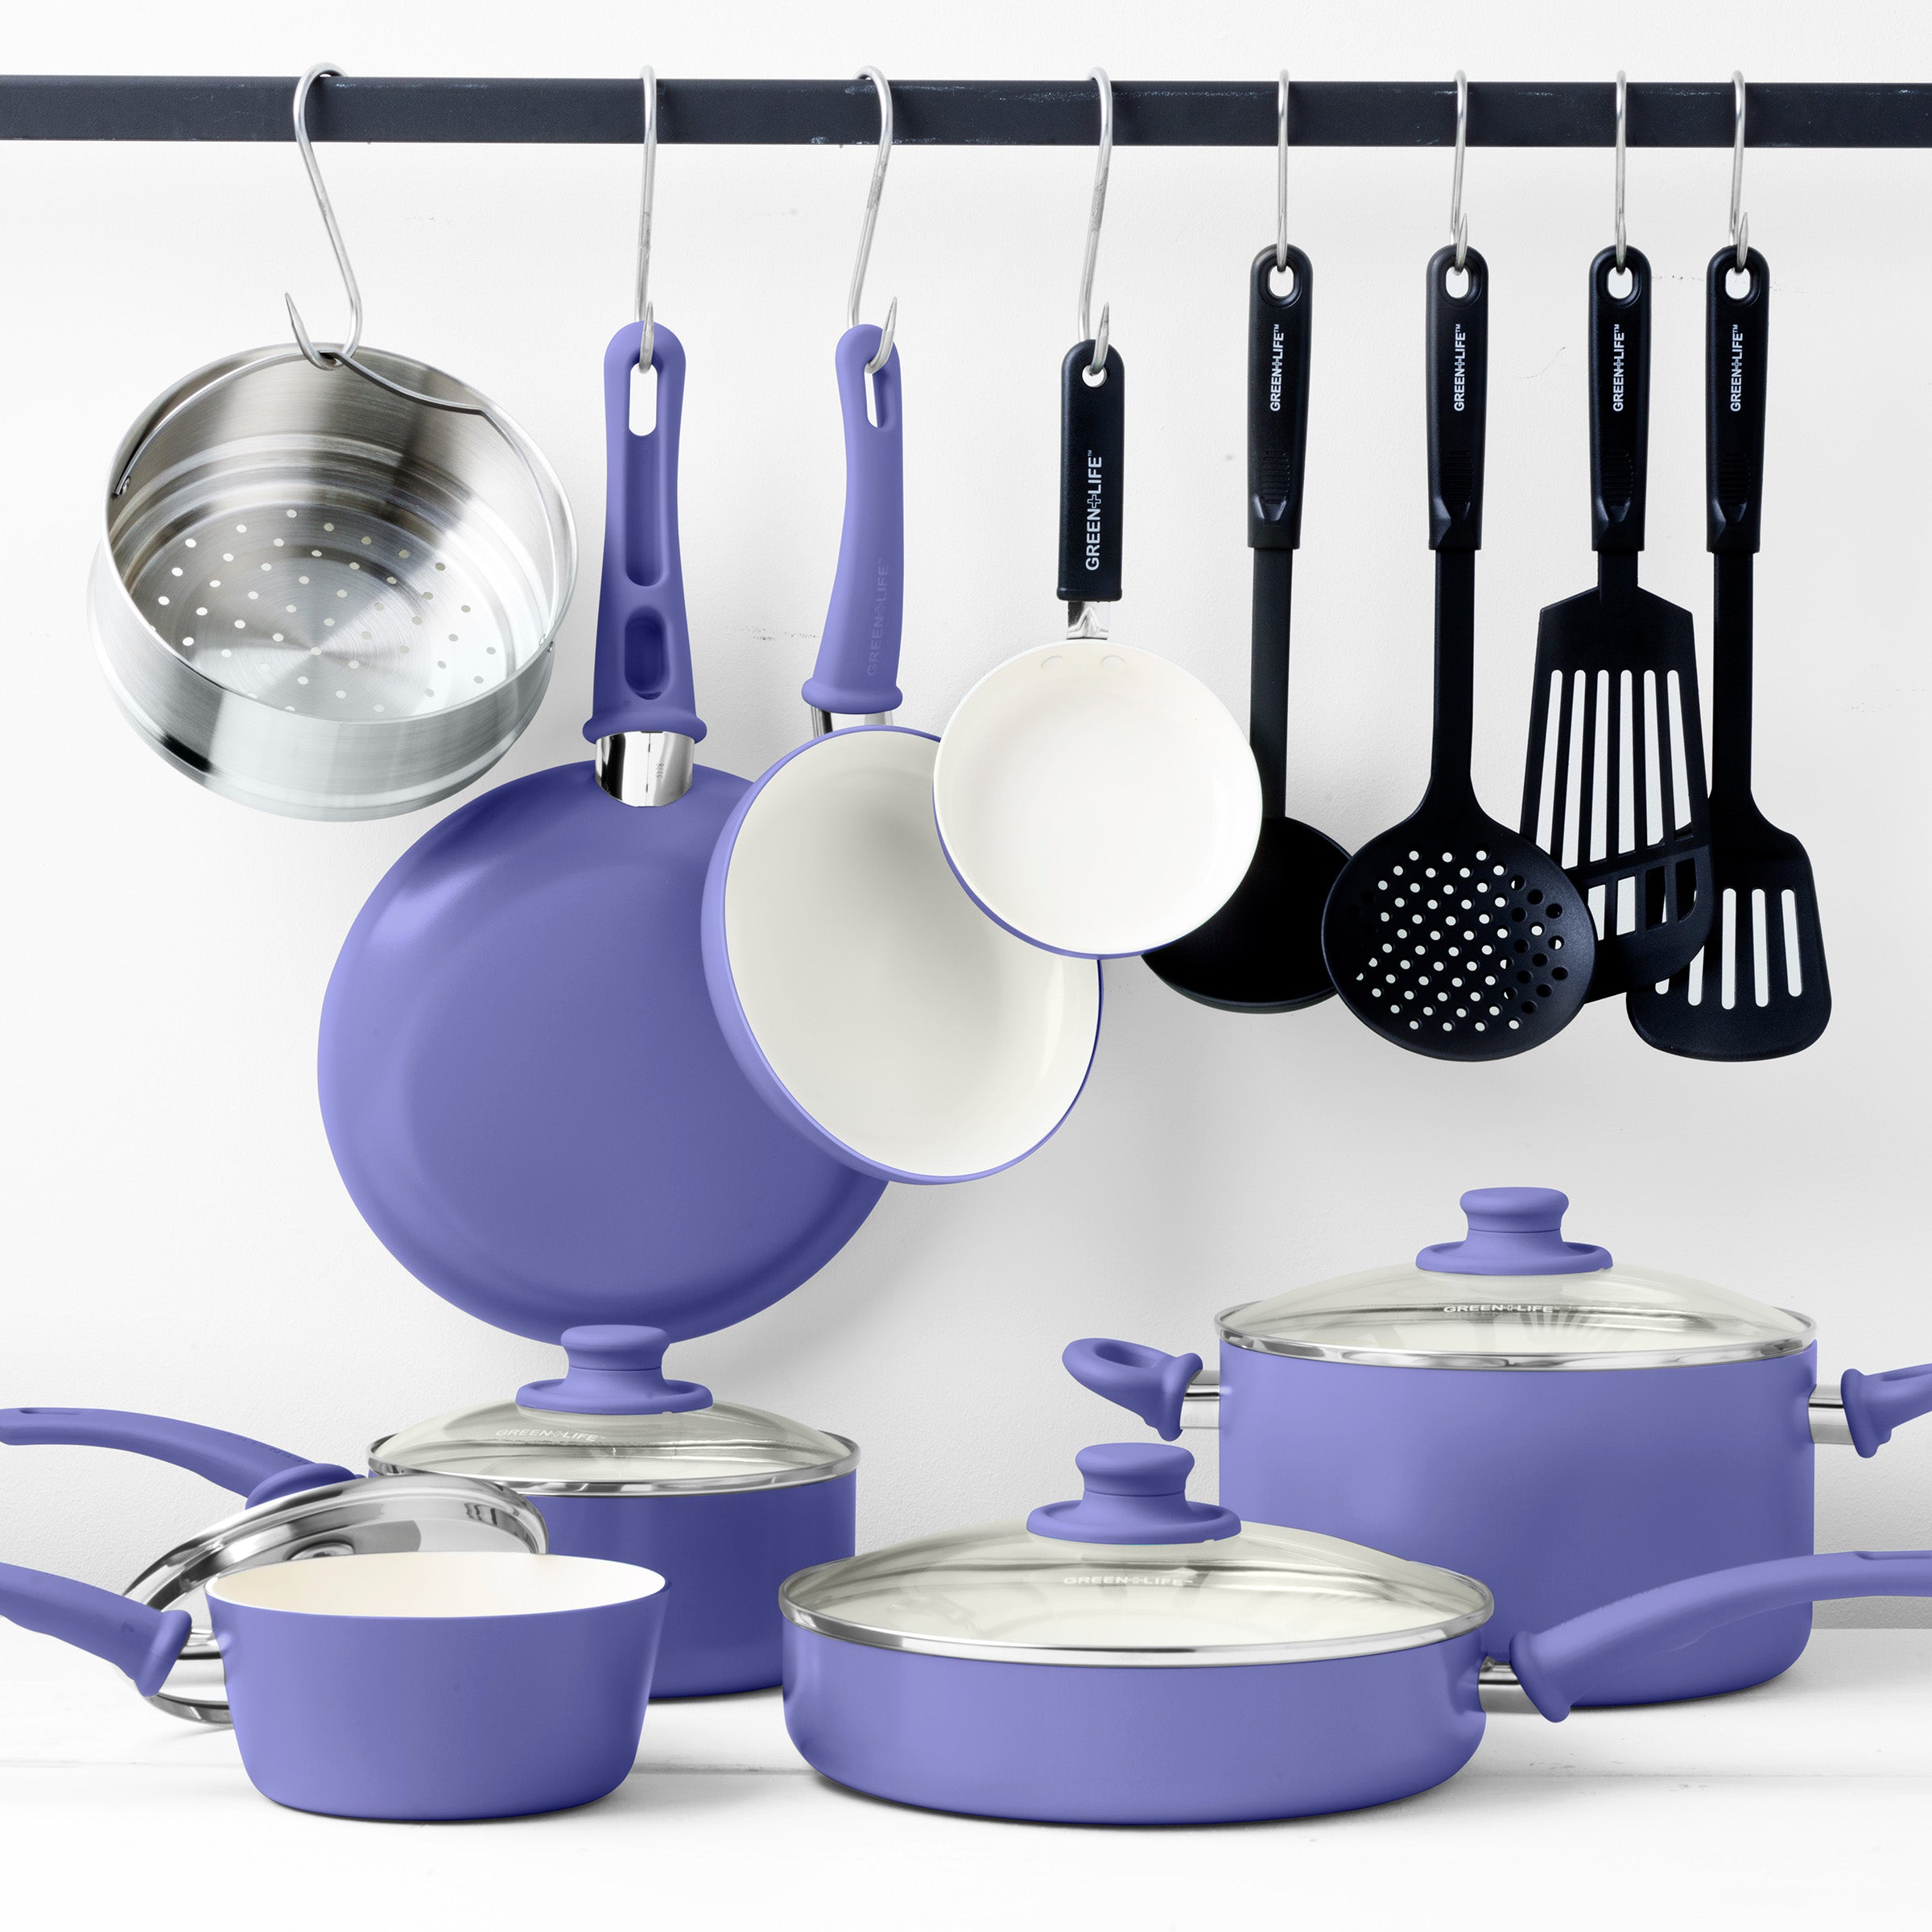 GreenLife Soft Grip 16pc Cookware Sets, Caribbean Blue, Healthy Ceramic  Nonstick Cookware